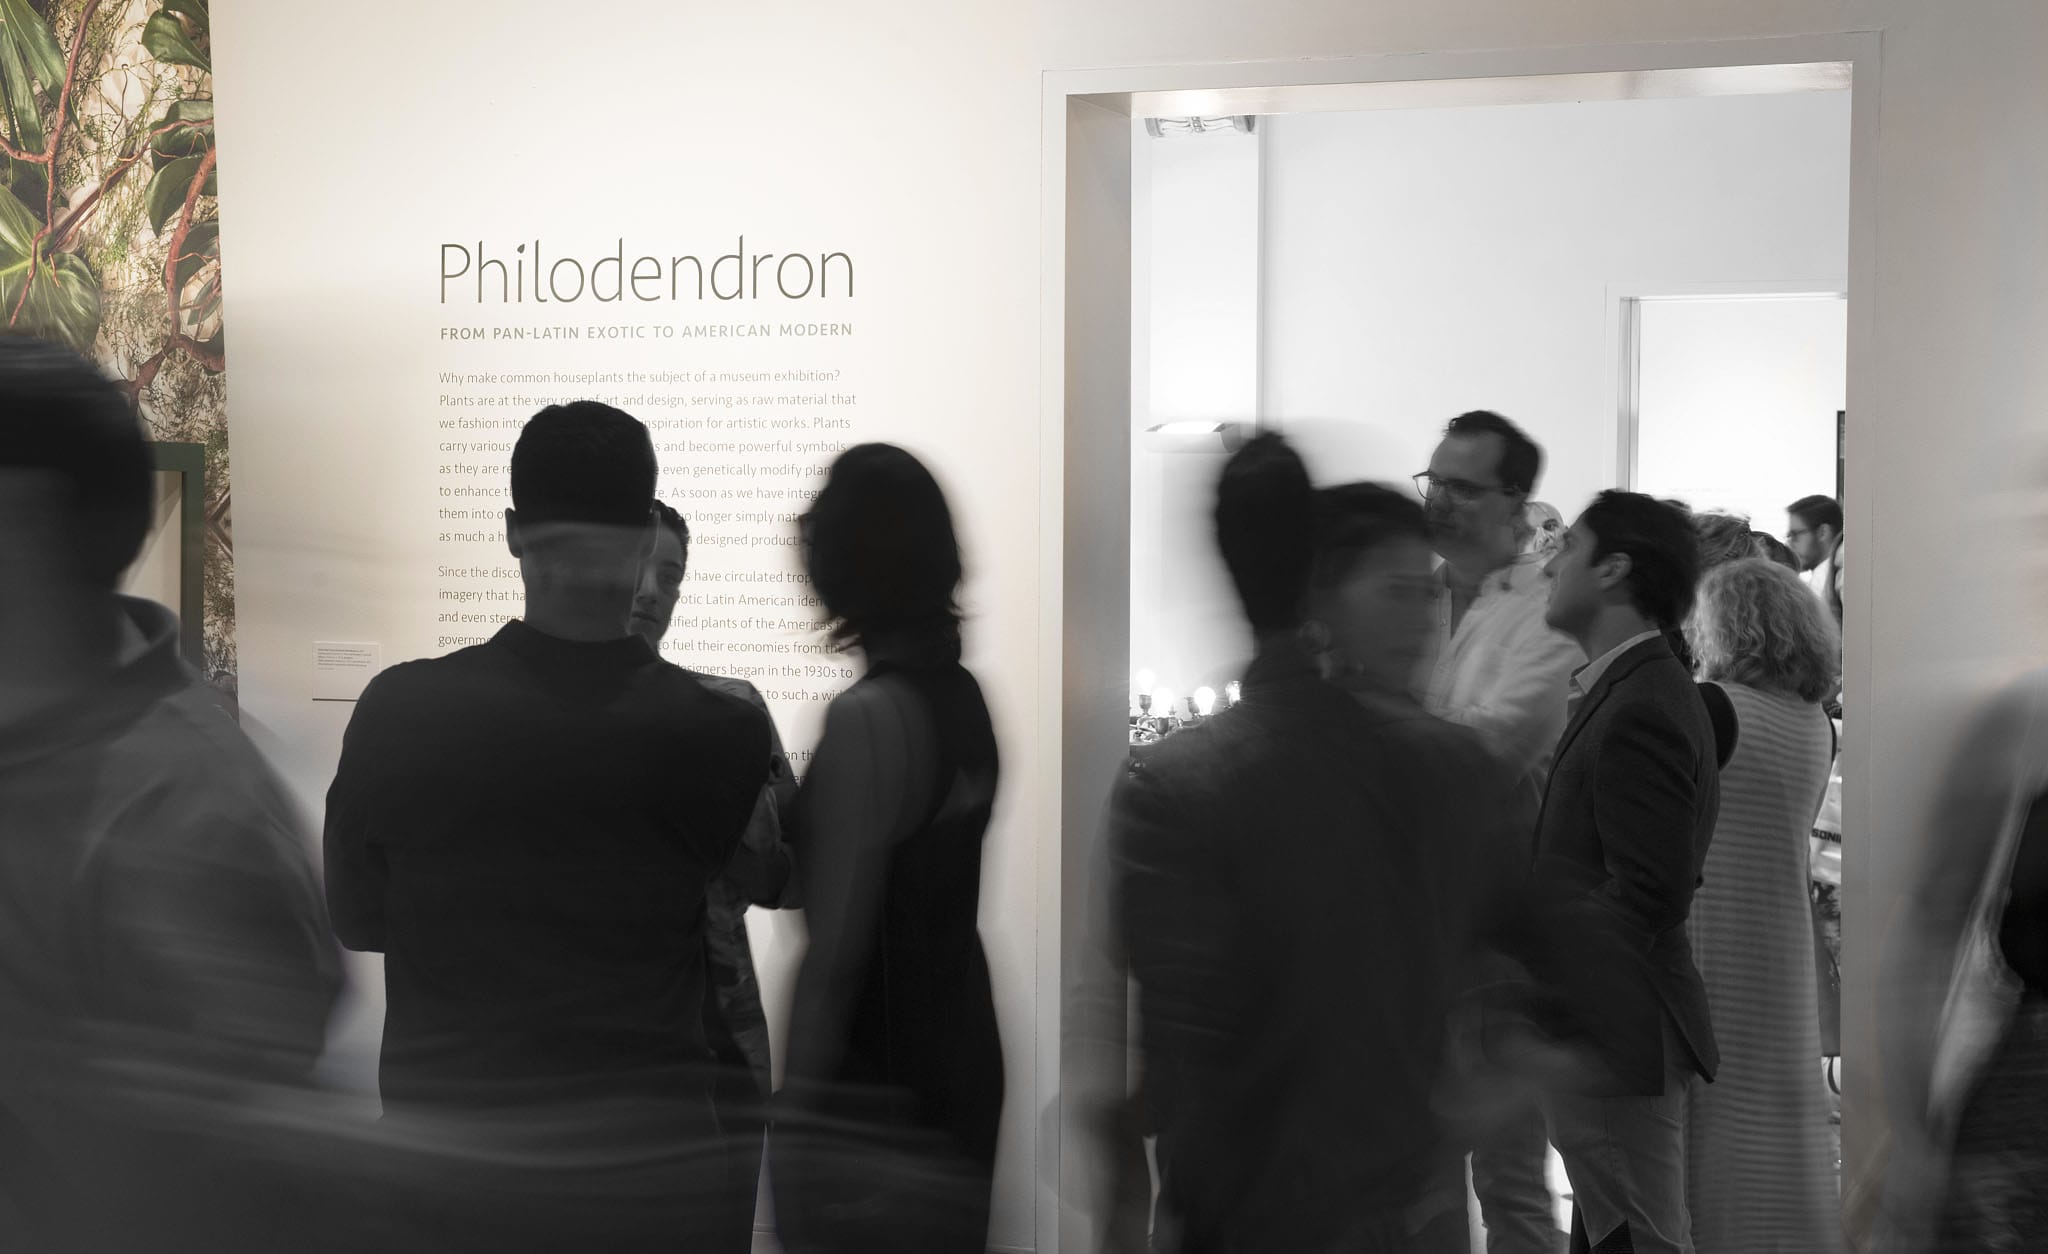 guests crown around the Philodendron exhibit at The Wolfsonian